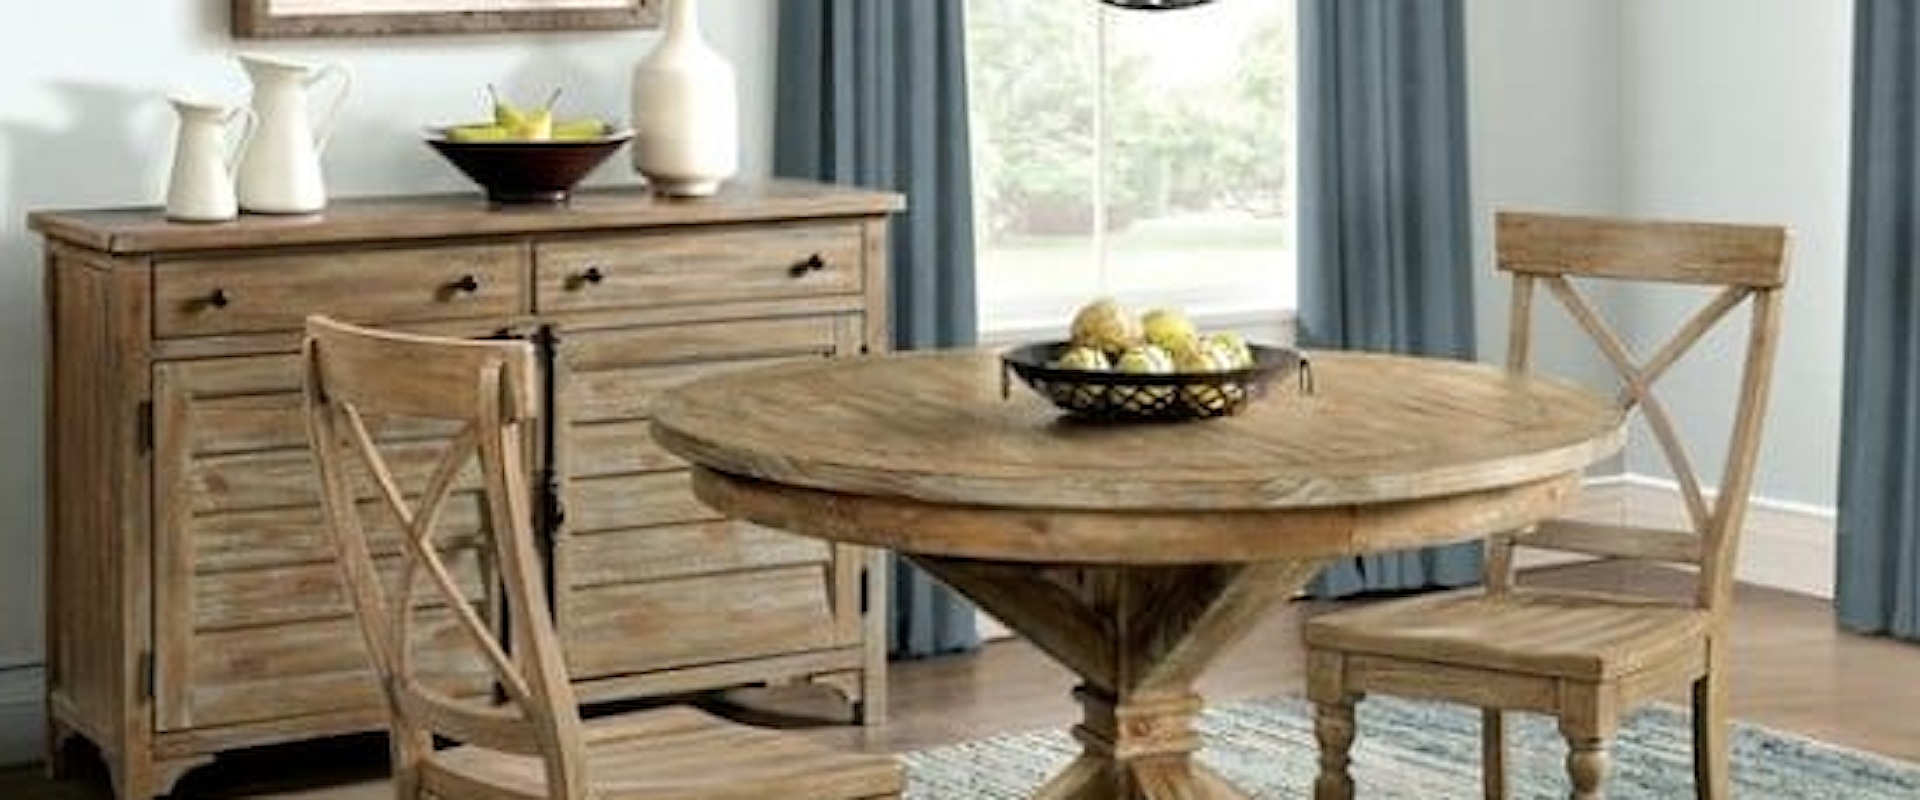 Rustic Dining Room Group